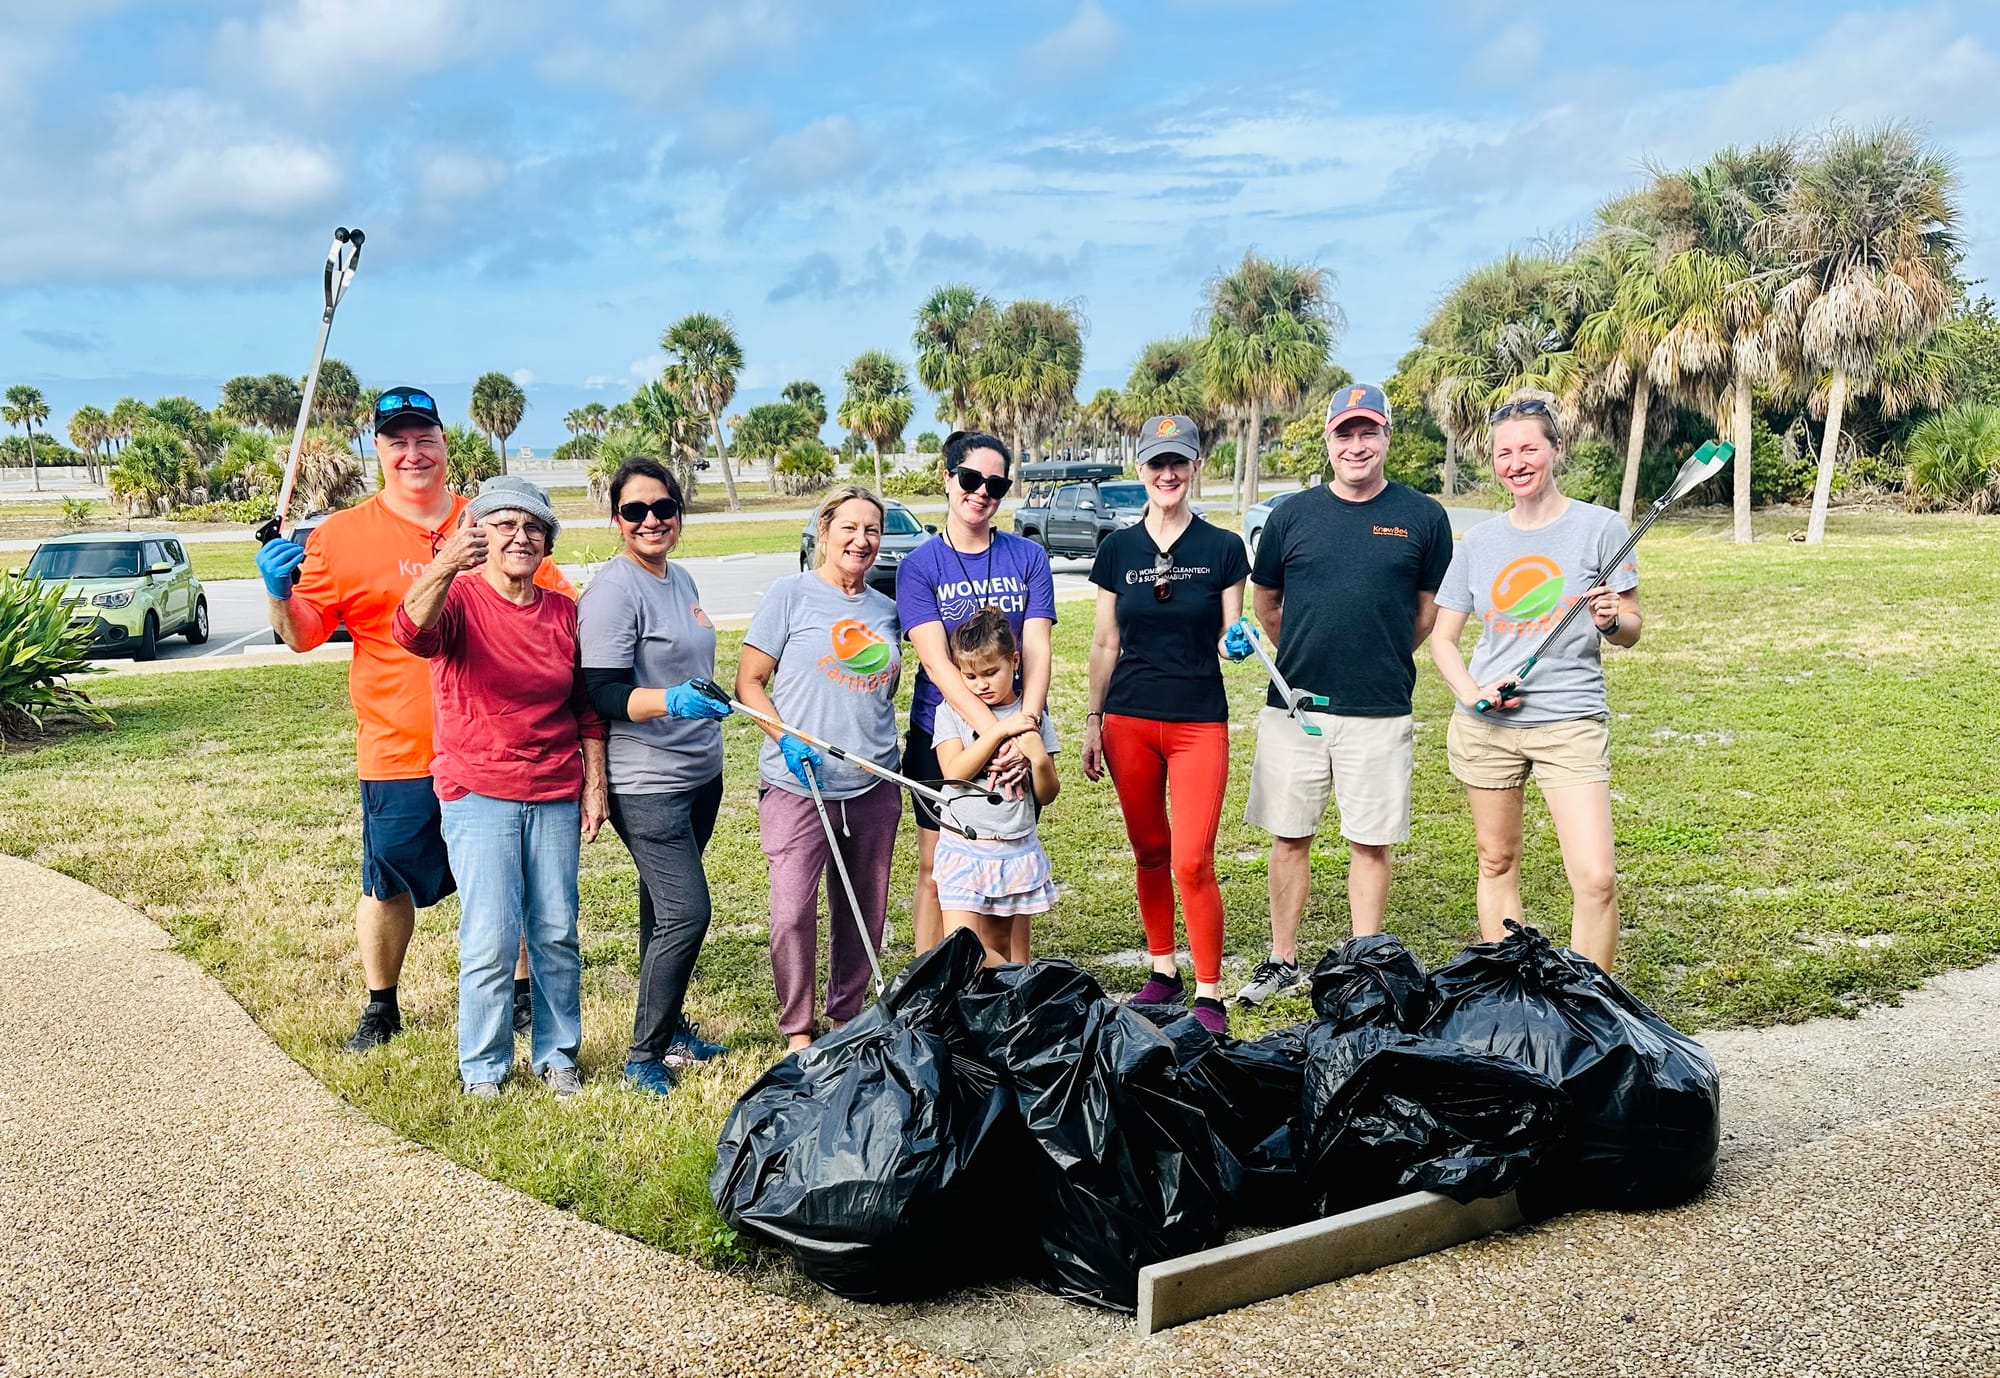 Group of people at a cleanup event holding trash pickers and posing in front of trash bags